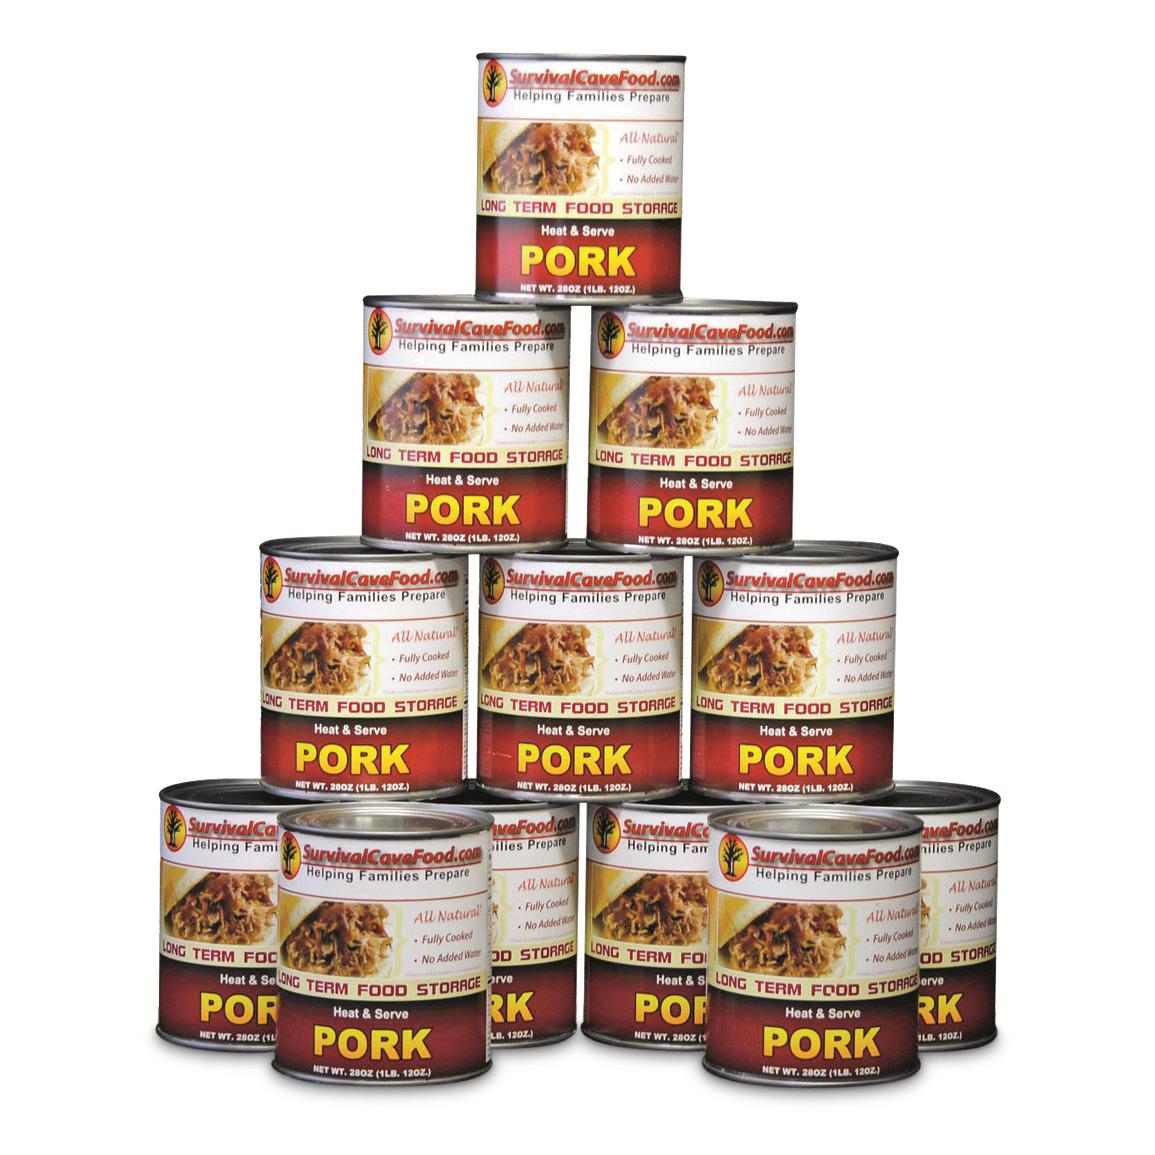 Survival Cave Case of Canned Pork, 108 Servings